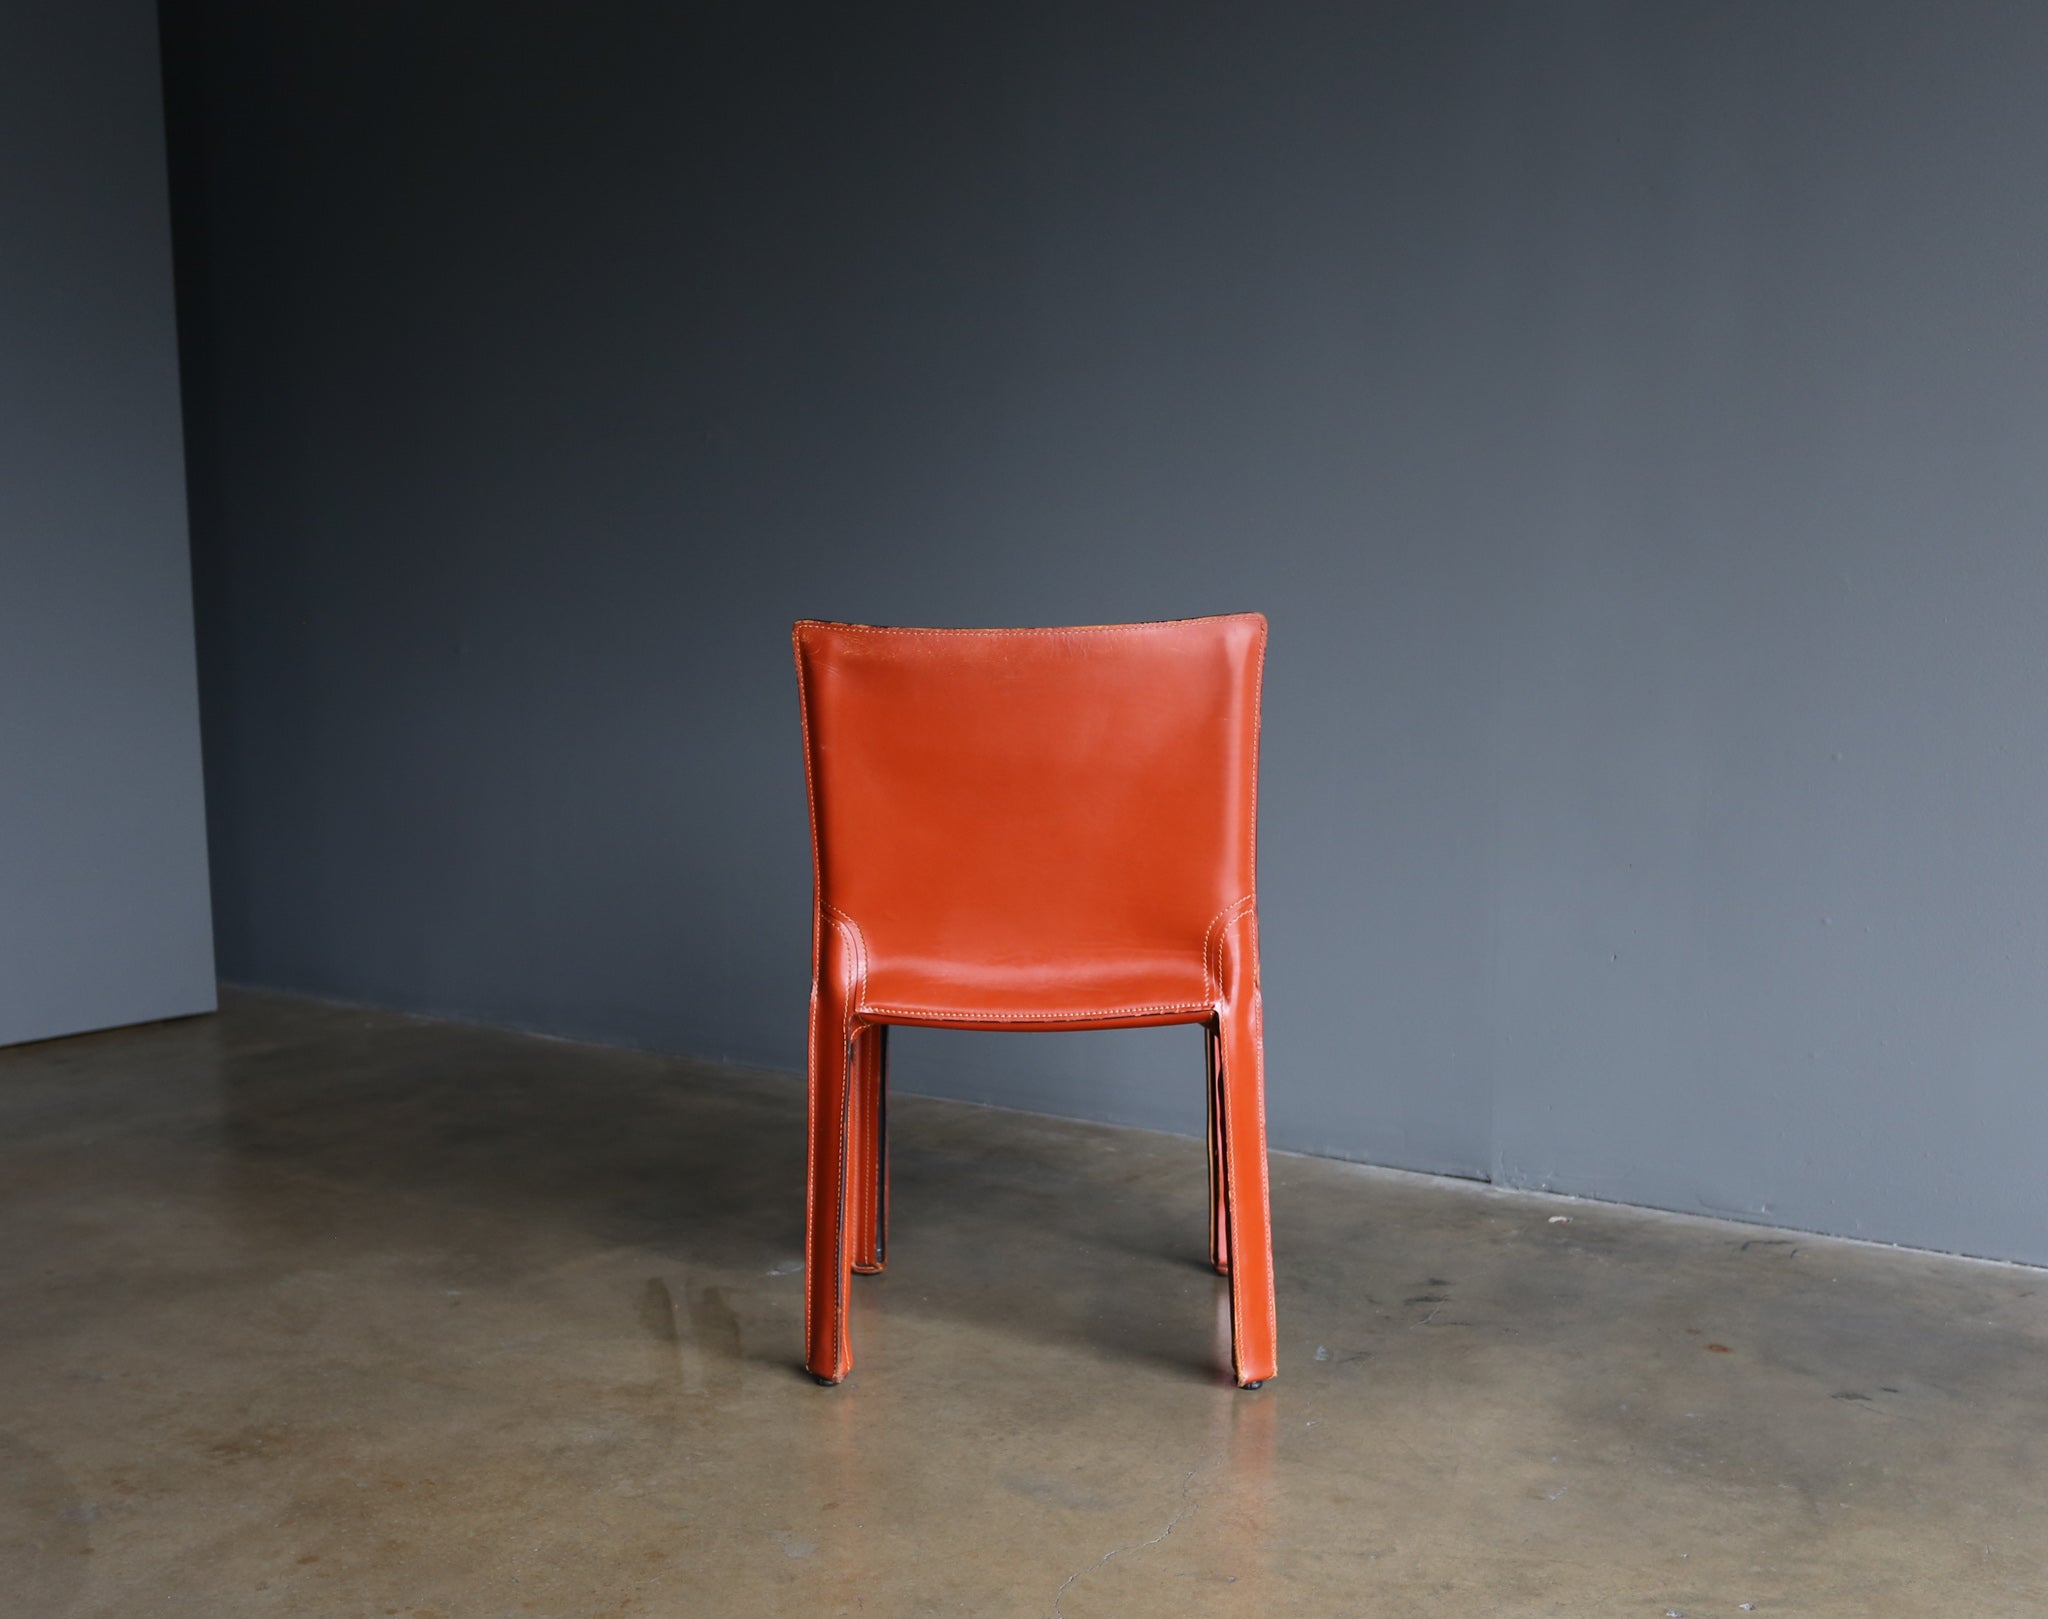 = SOLD = Mario Bellini Leather "Cab" Chairs for Cassina, circa 1980